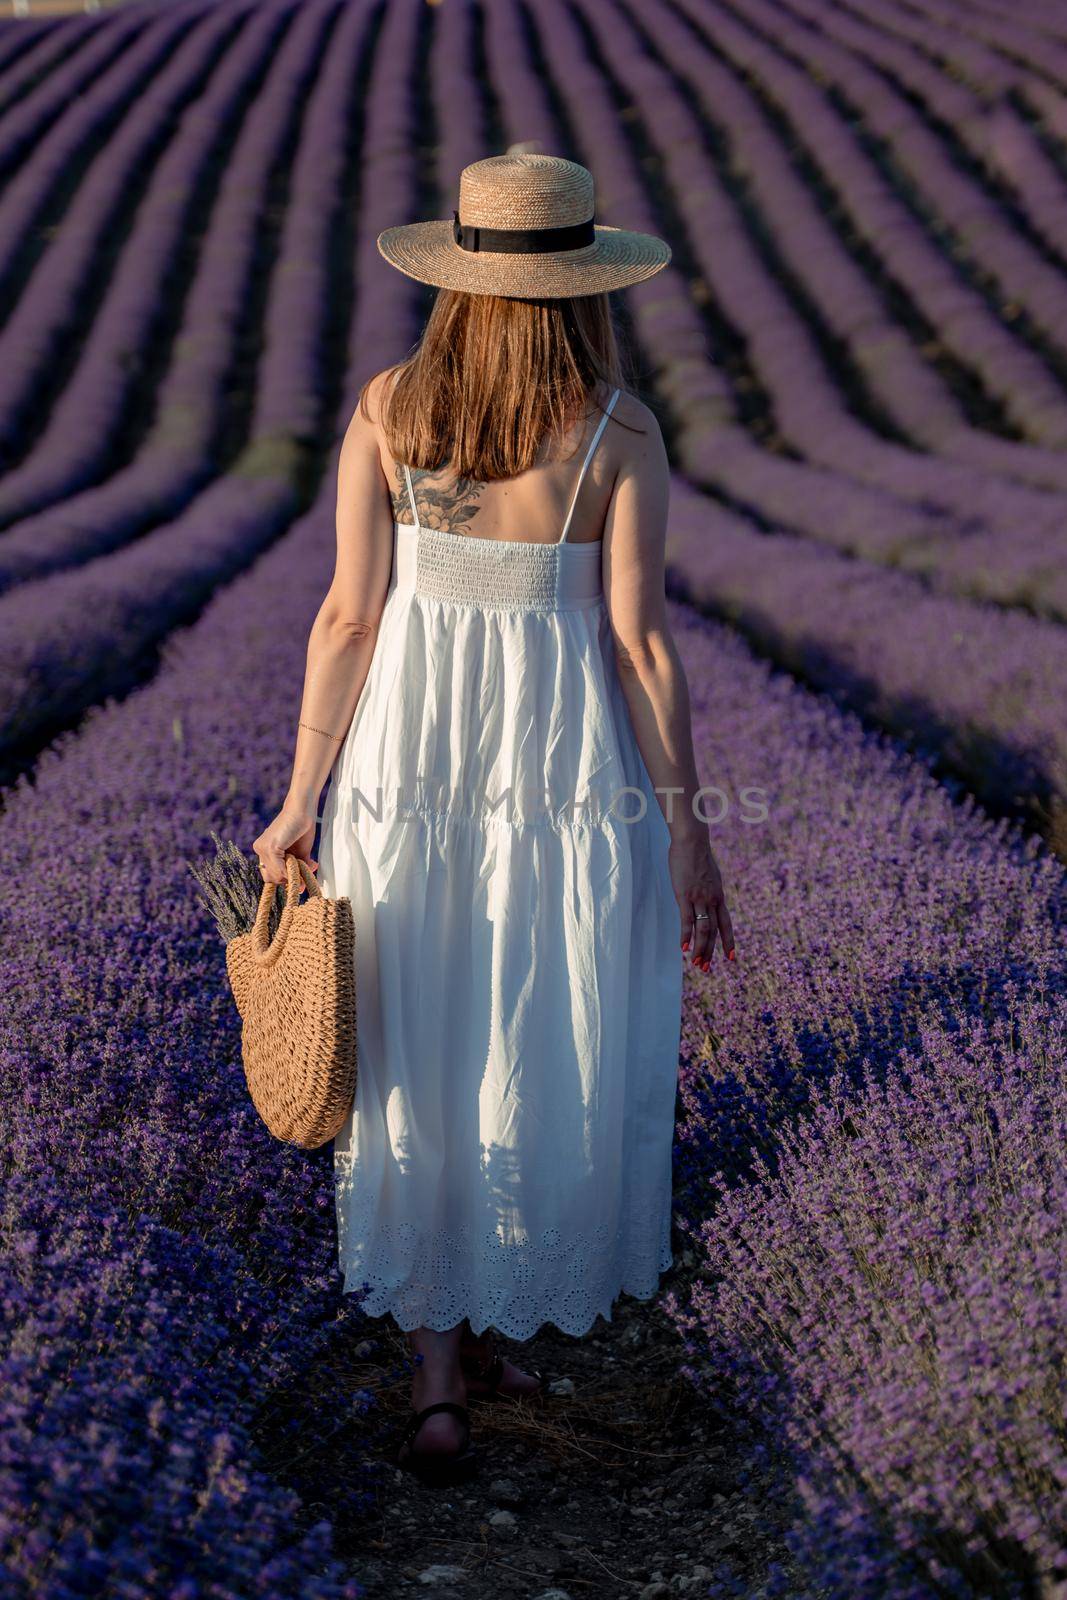 A middle-aged woman, blonde in a white dress and hat, walks through a lavender field with a basket.